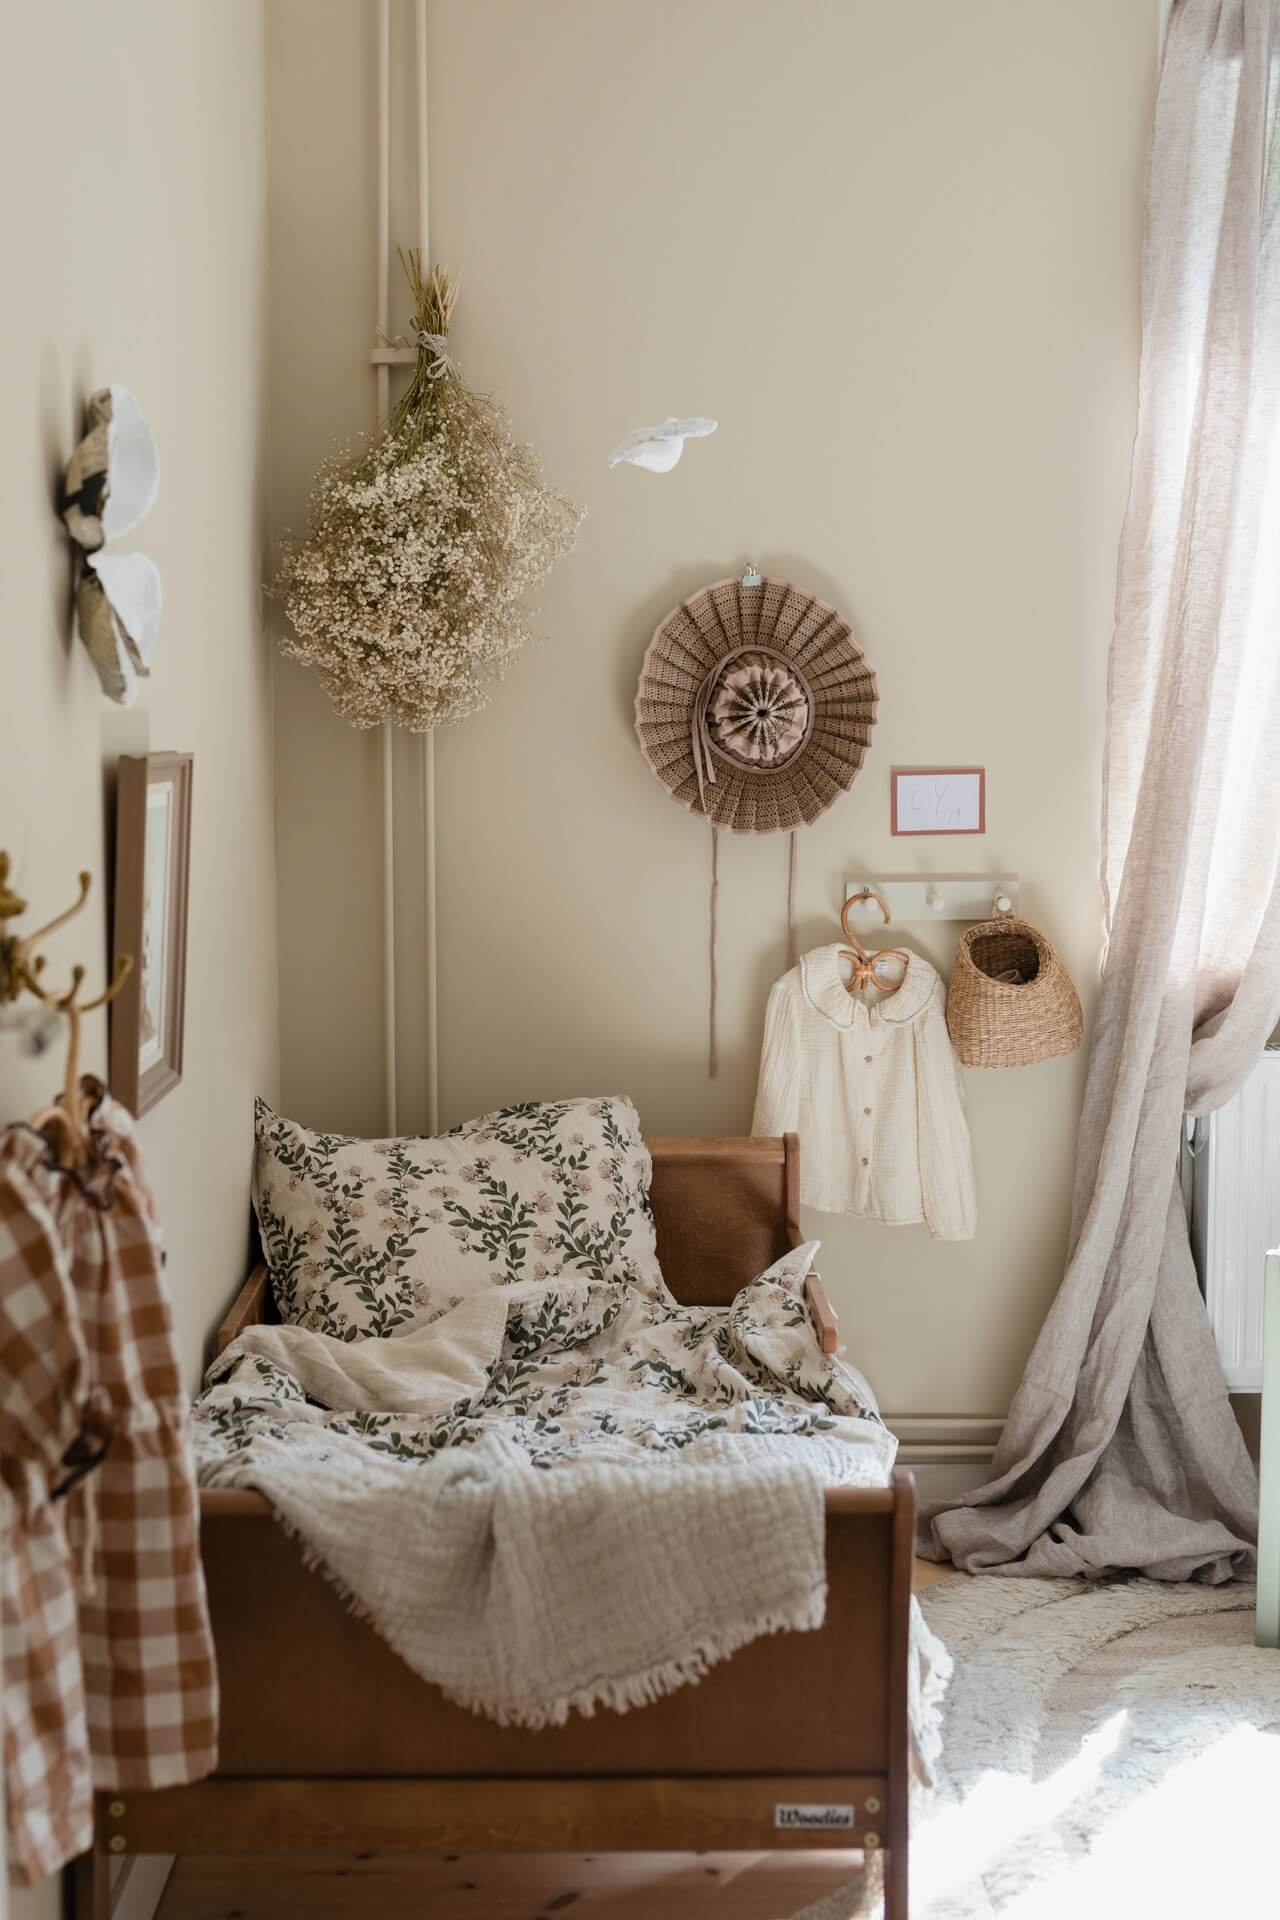 Inspiration decoration chambre - Marie and Mood - Blog mode lifestyle